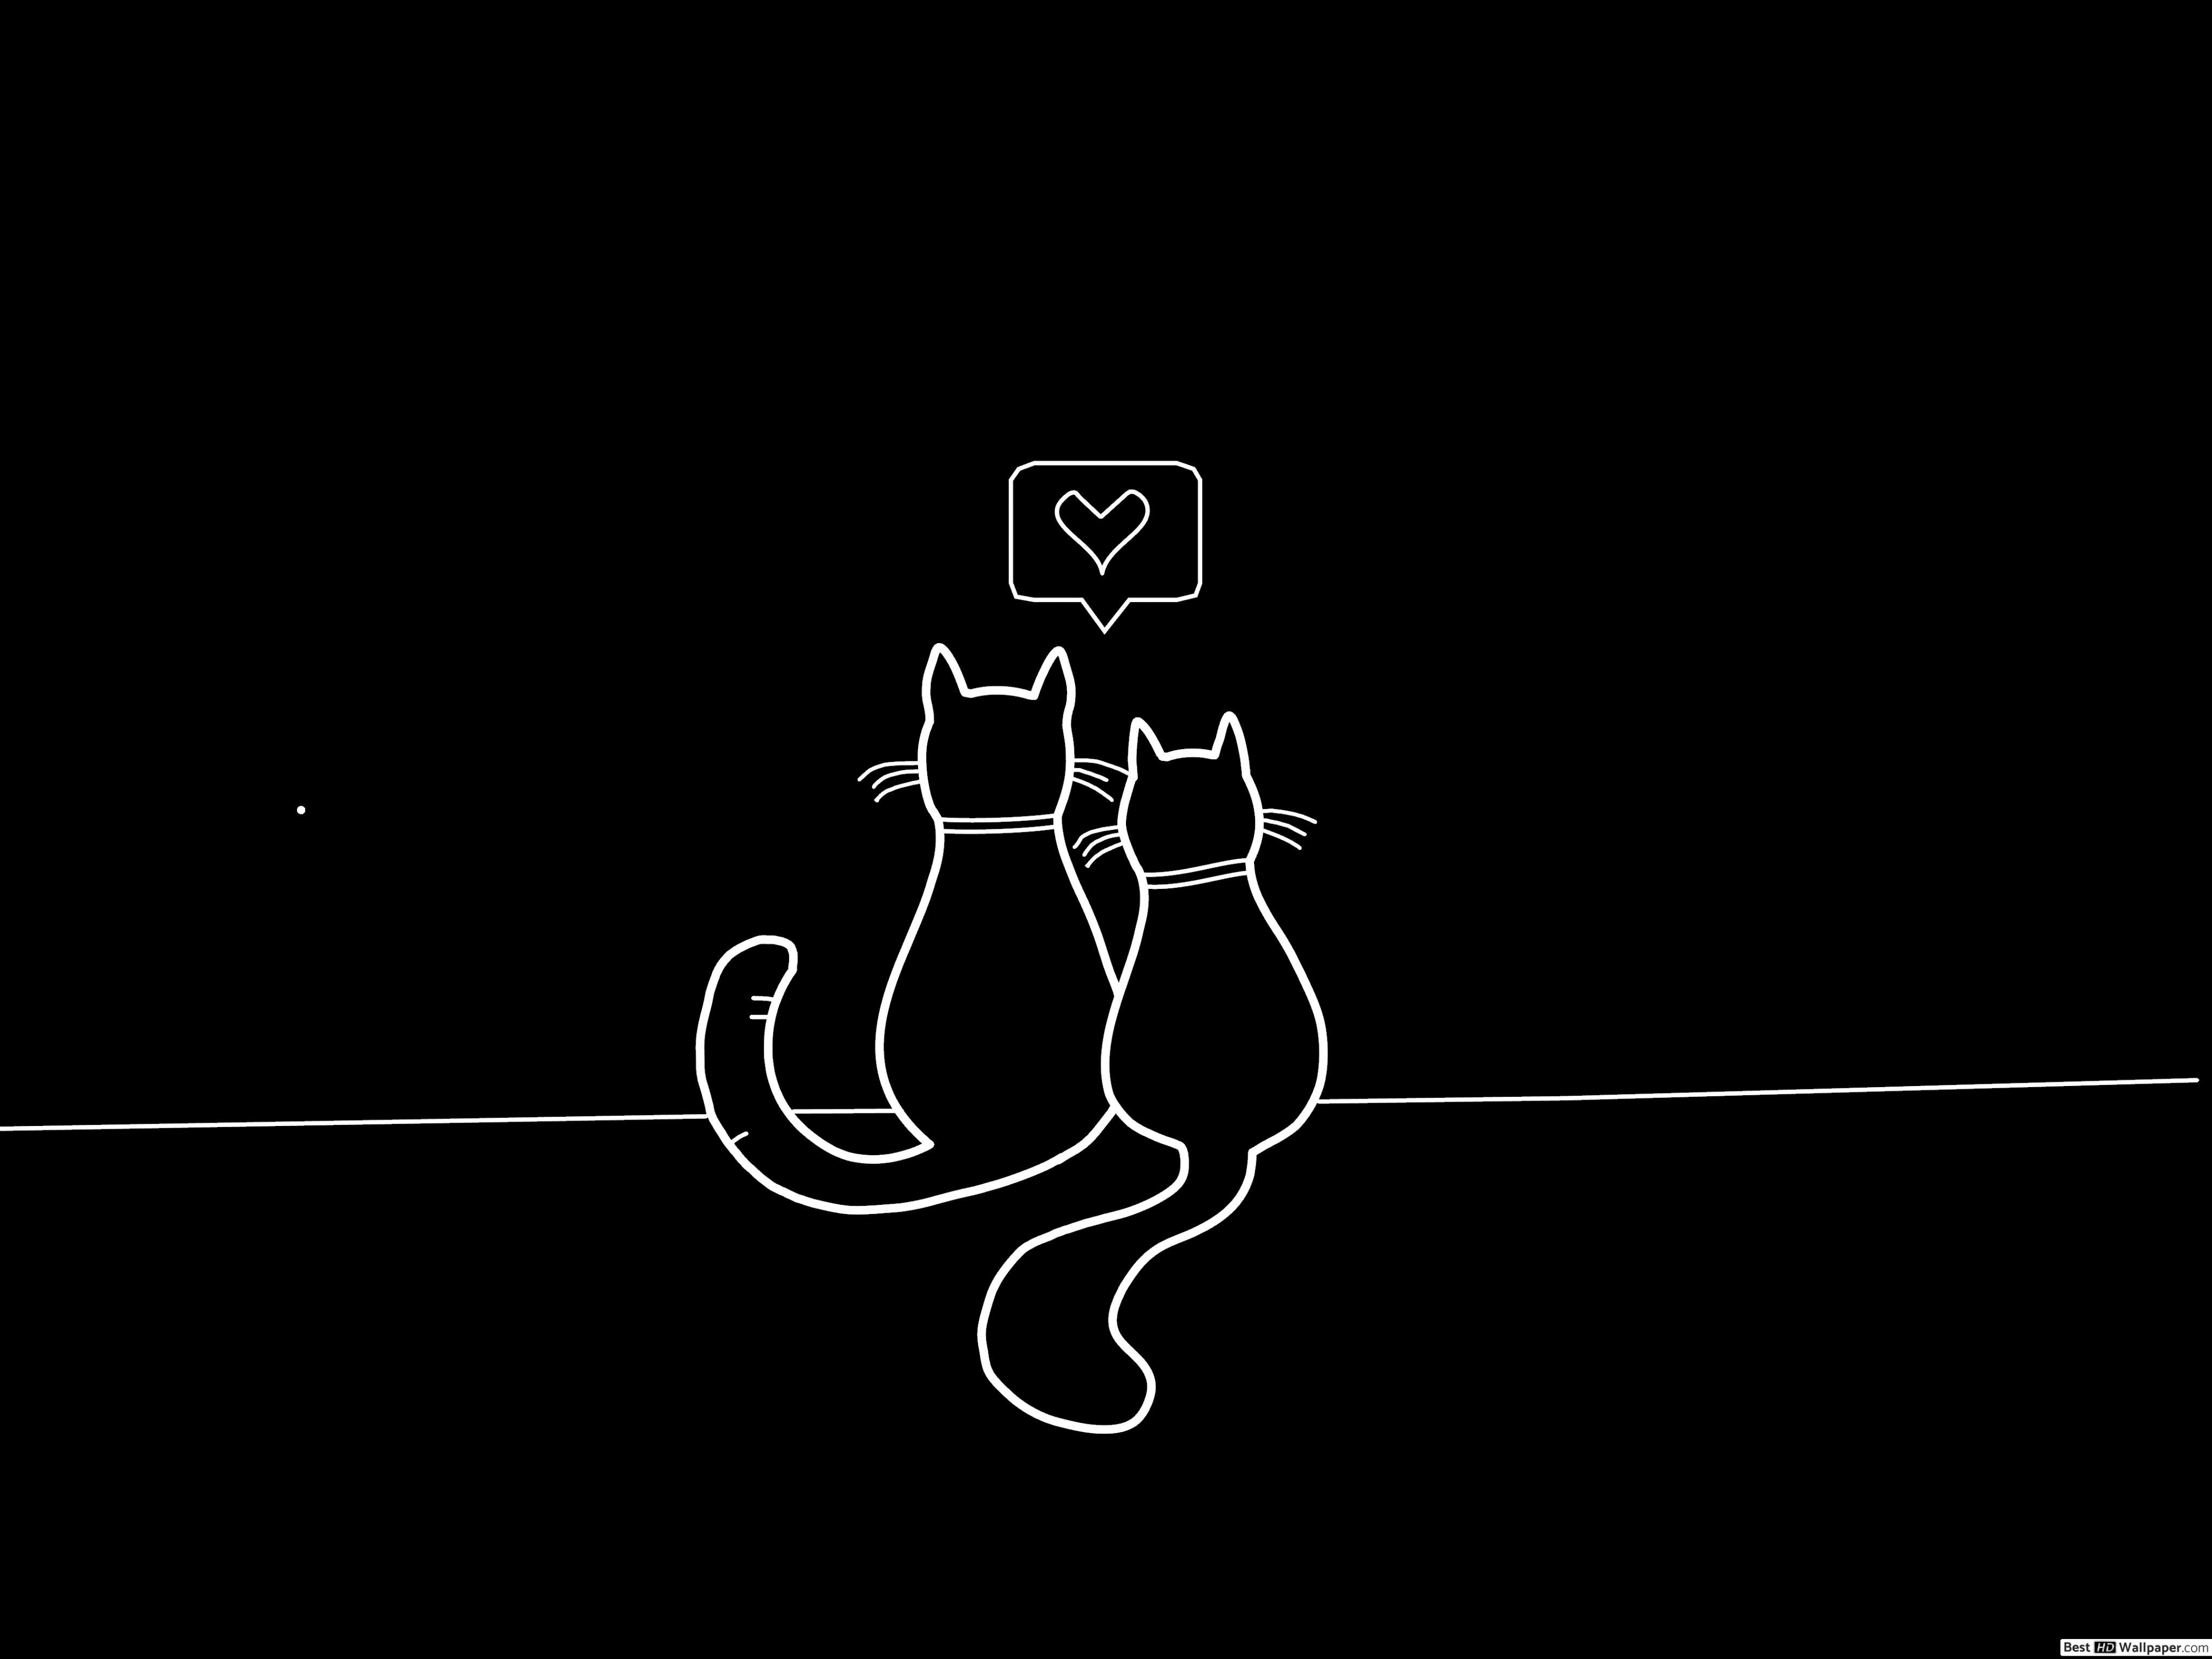 Lover cats Amoled HD wallpaper download